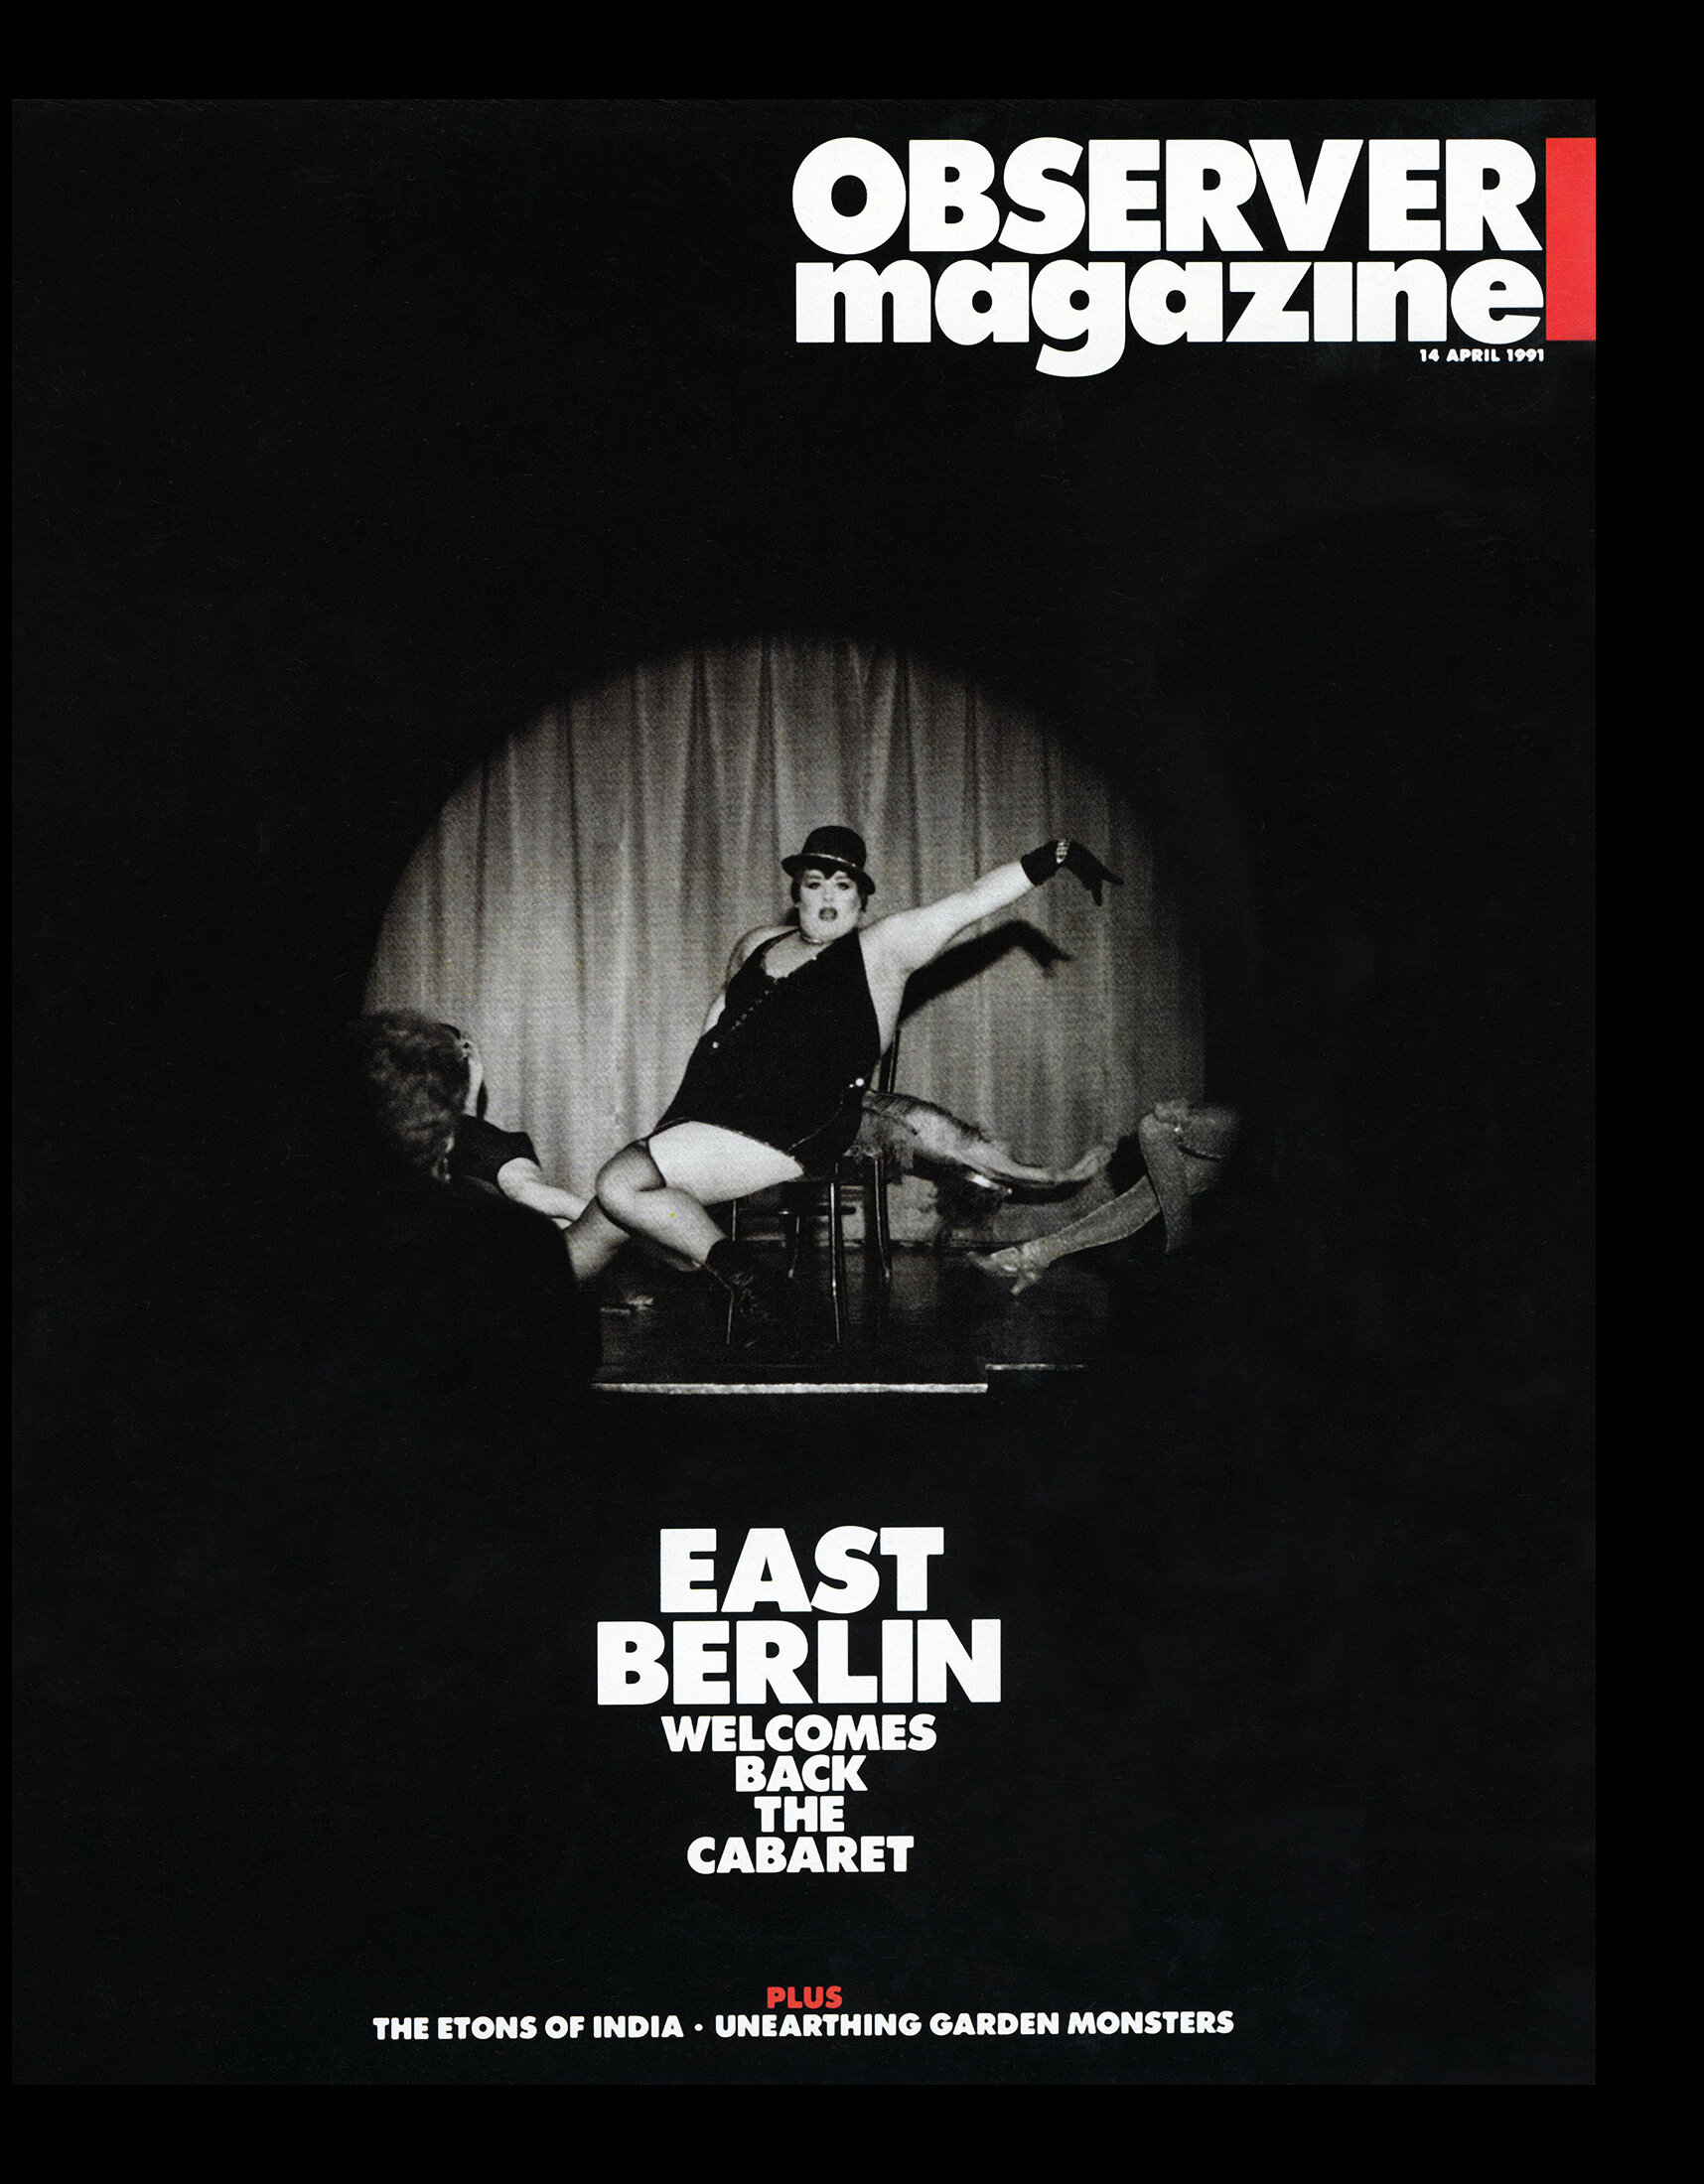  London Observer Magazine, "Berlin After The Wall"    Published on April 14, 1991.  